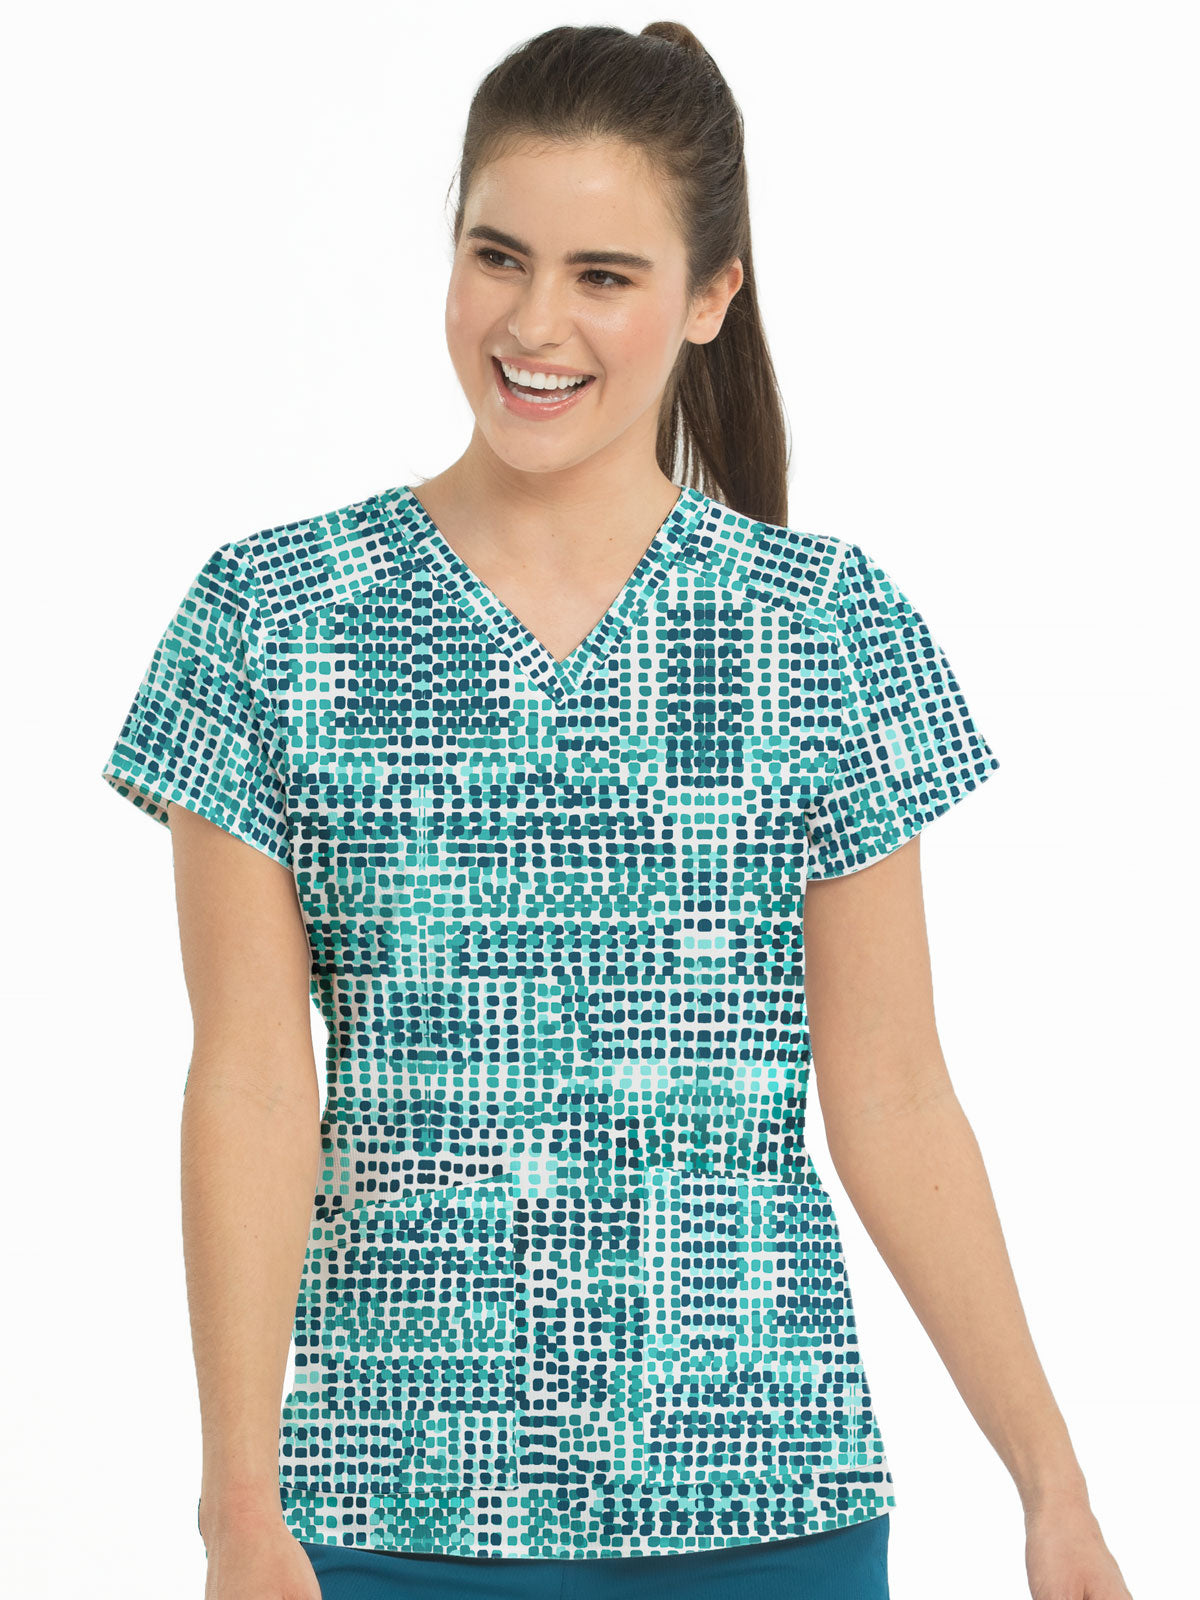 Med Couture Scrub Top Prints Squared Fantasy